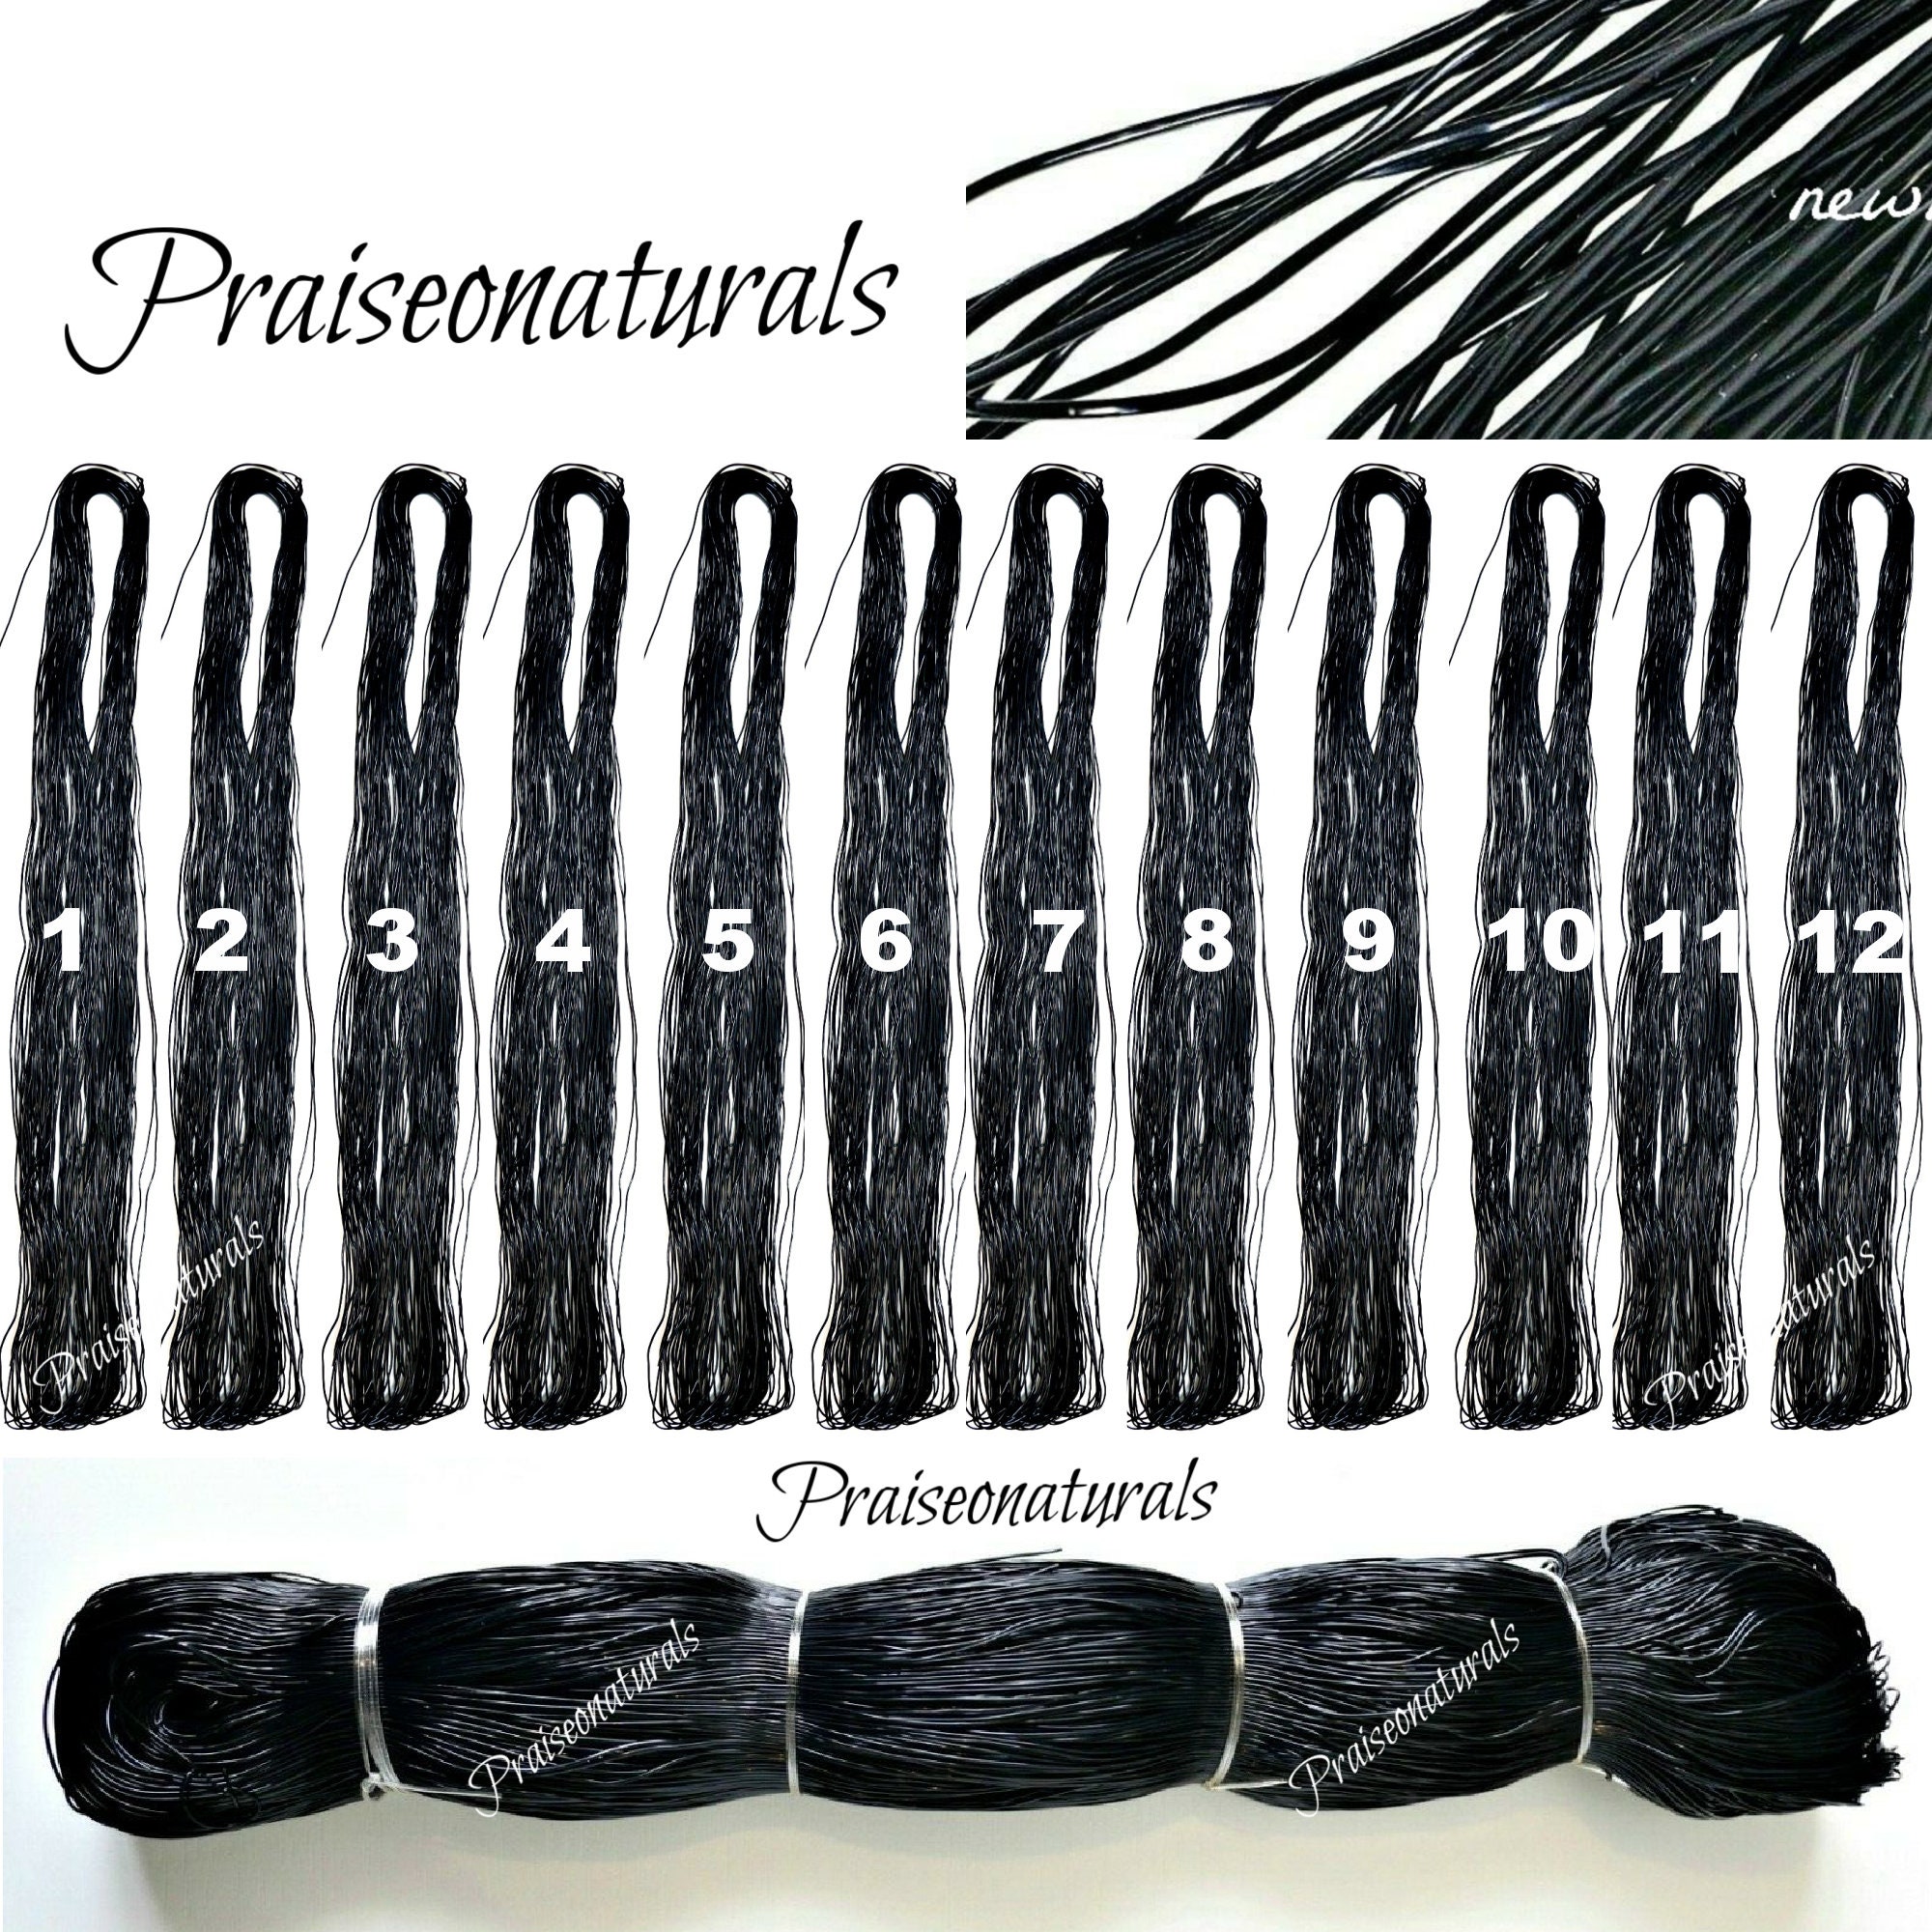 Hair Thread Rubber Thread, 3or6 Bundle African Rubber Threading for Hair Strengthening and Growth Retention Thread, Protective Style Thread